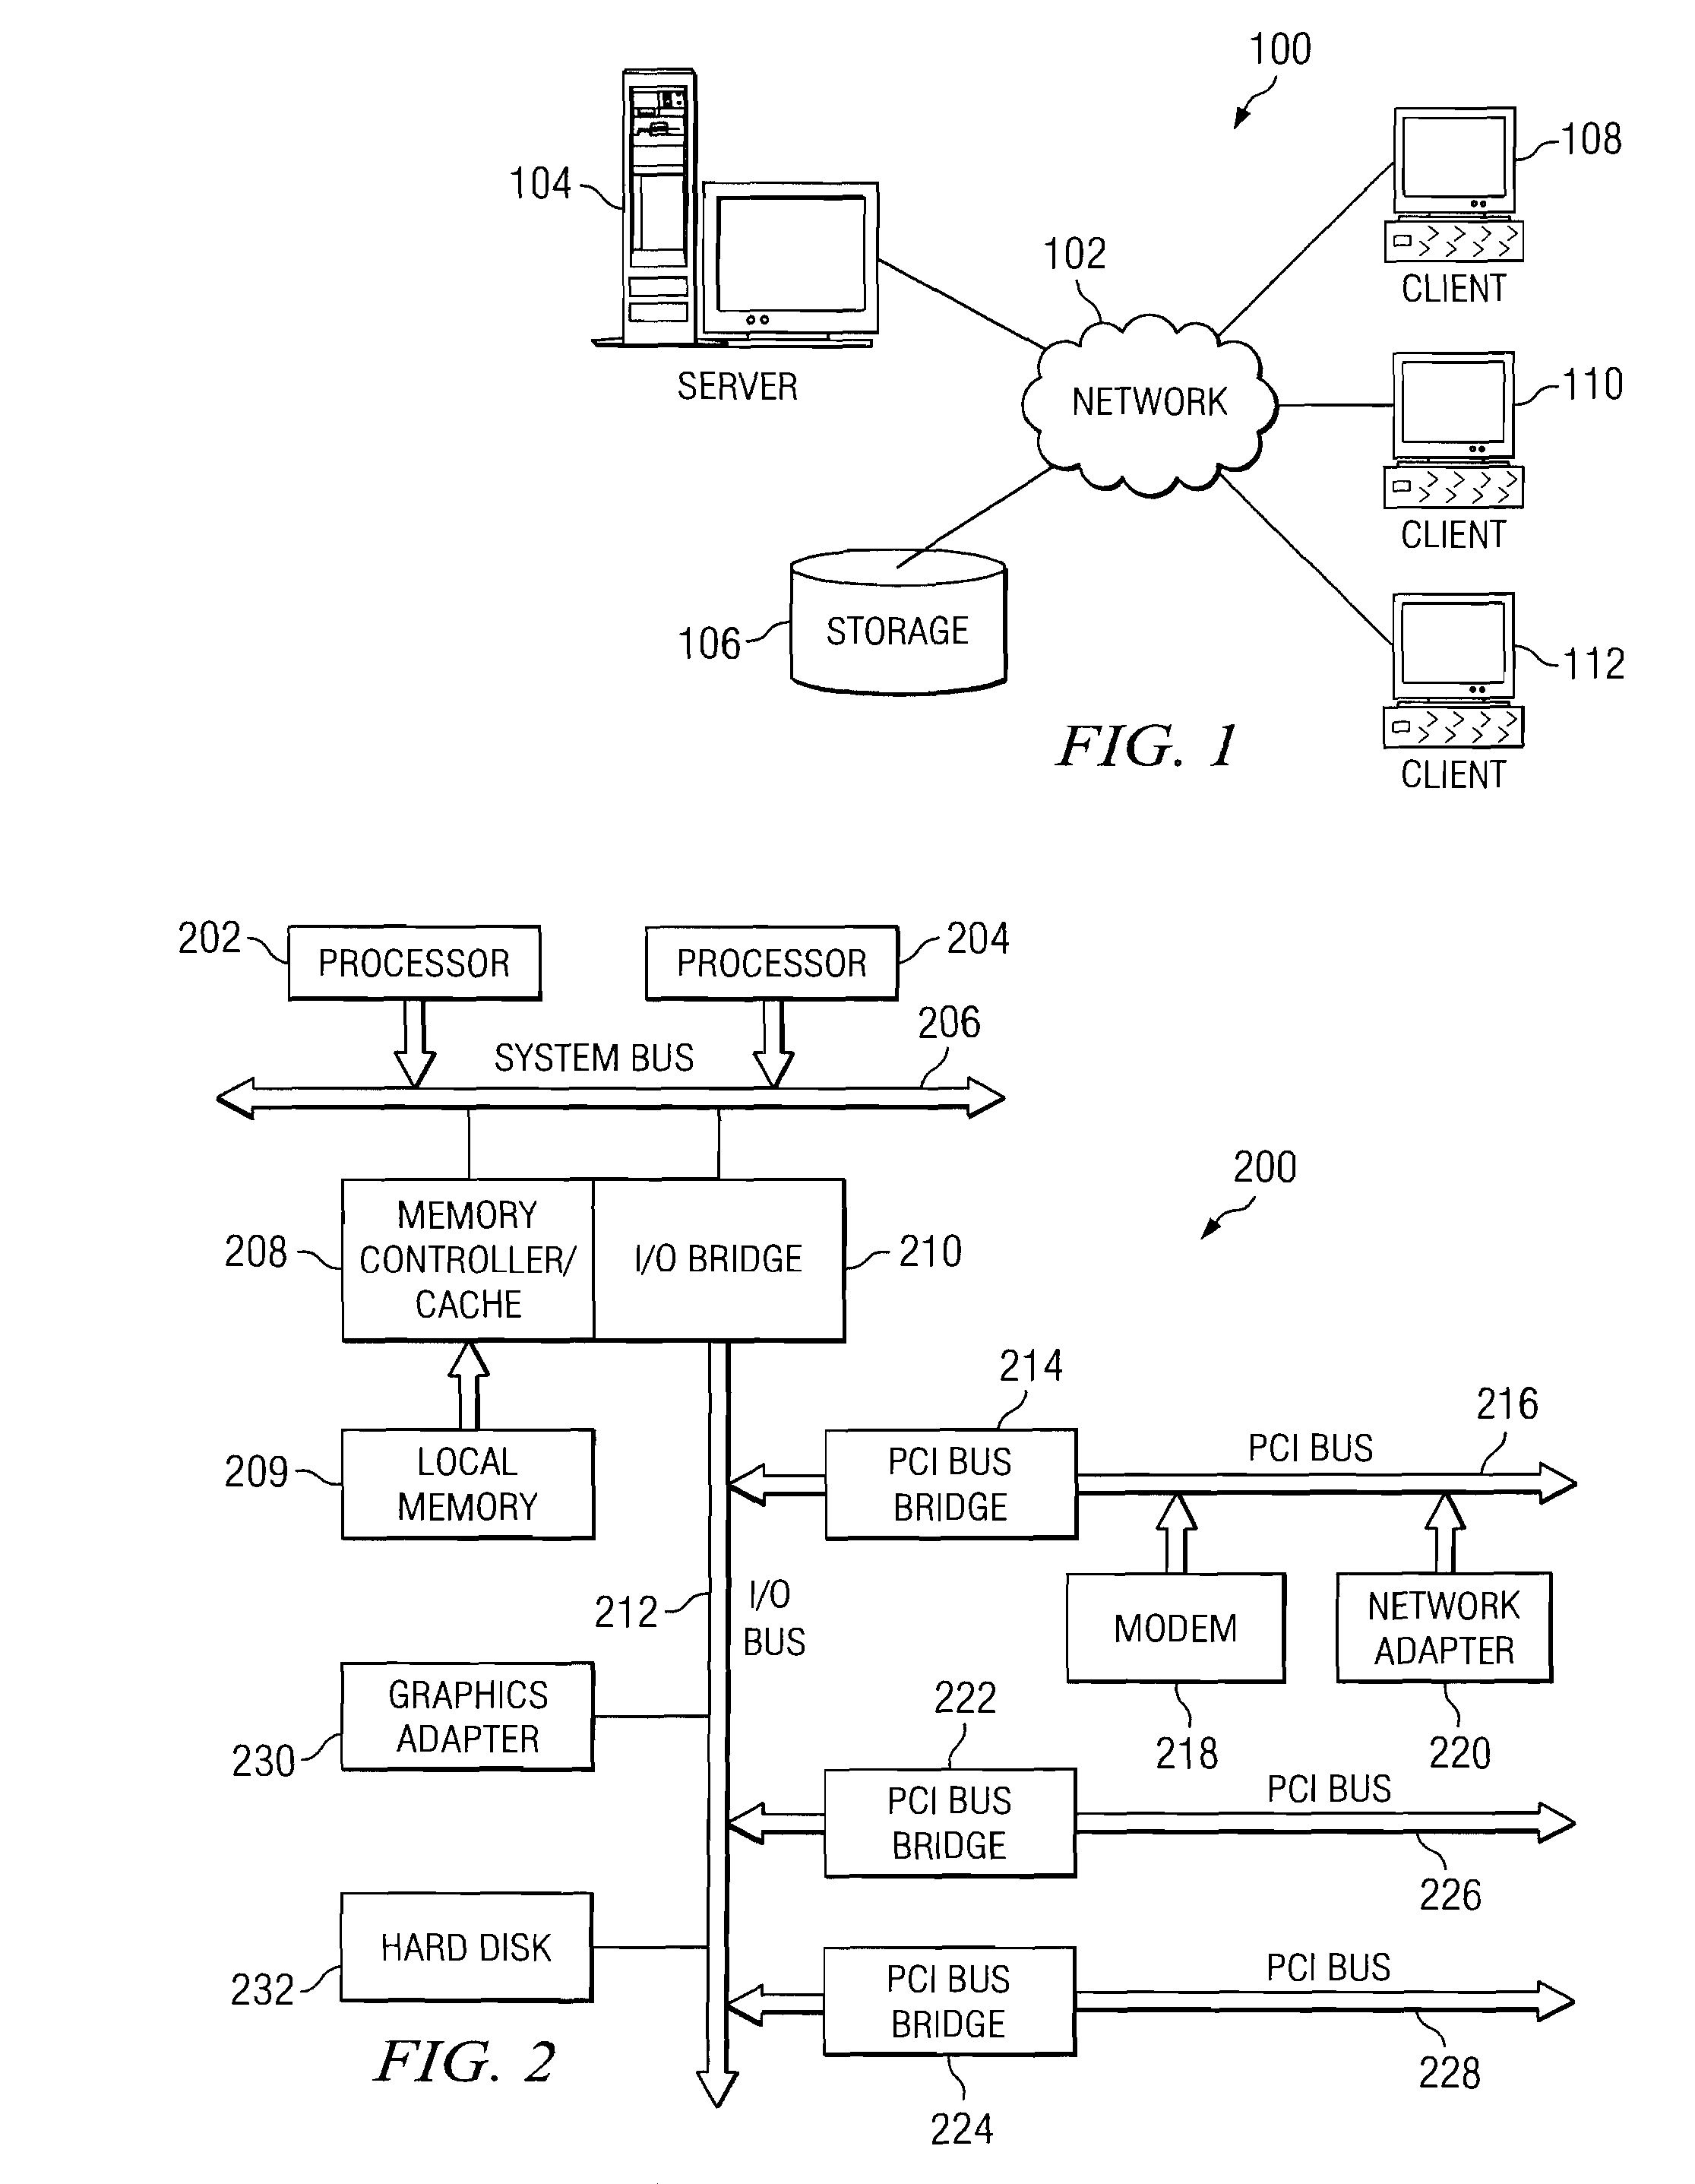 System and Method for Focused Routing of Content to Dynamically Determined Groups of Reviewers